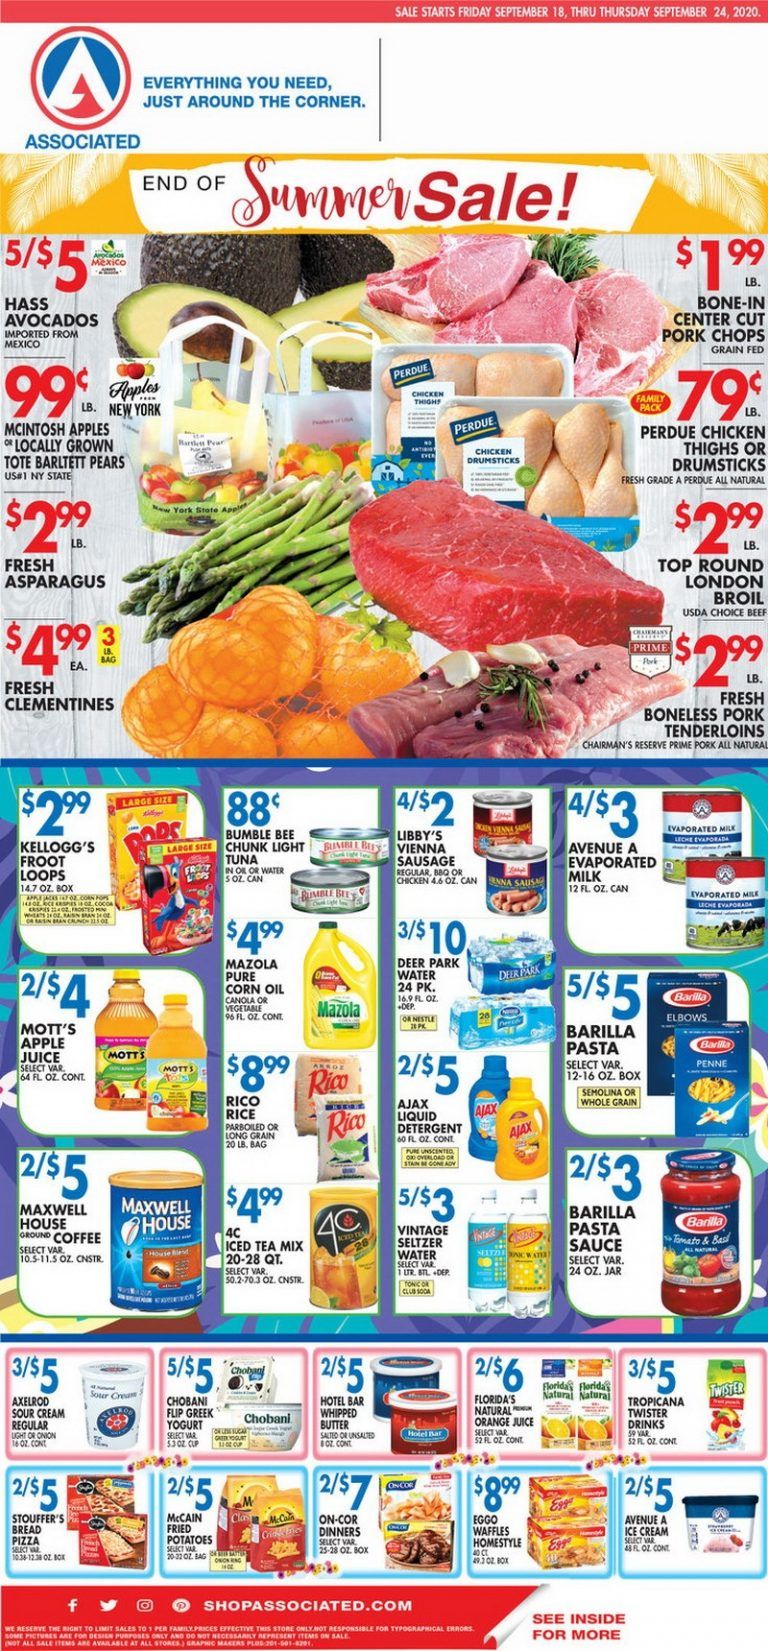 Associated Supermarkets Weekly Ad Sep 18 Sep 24, 2020